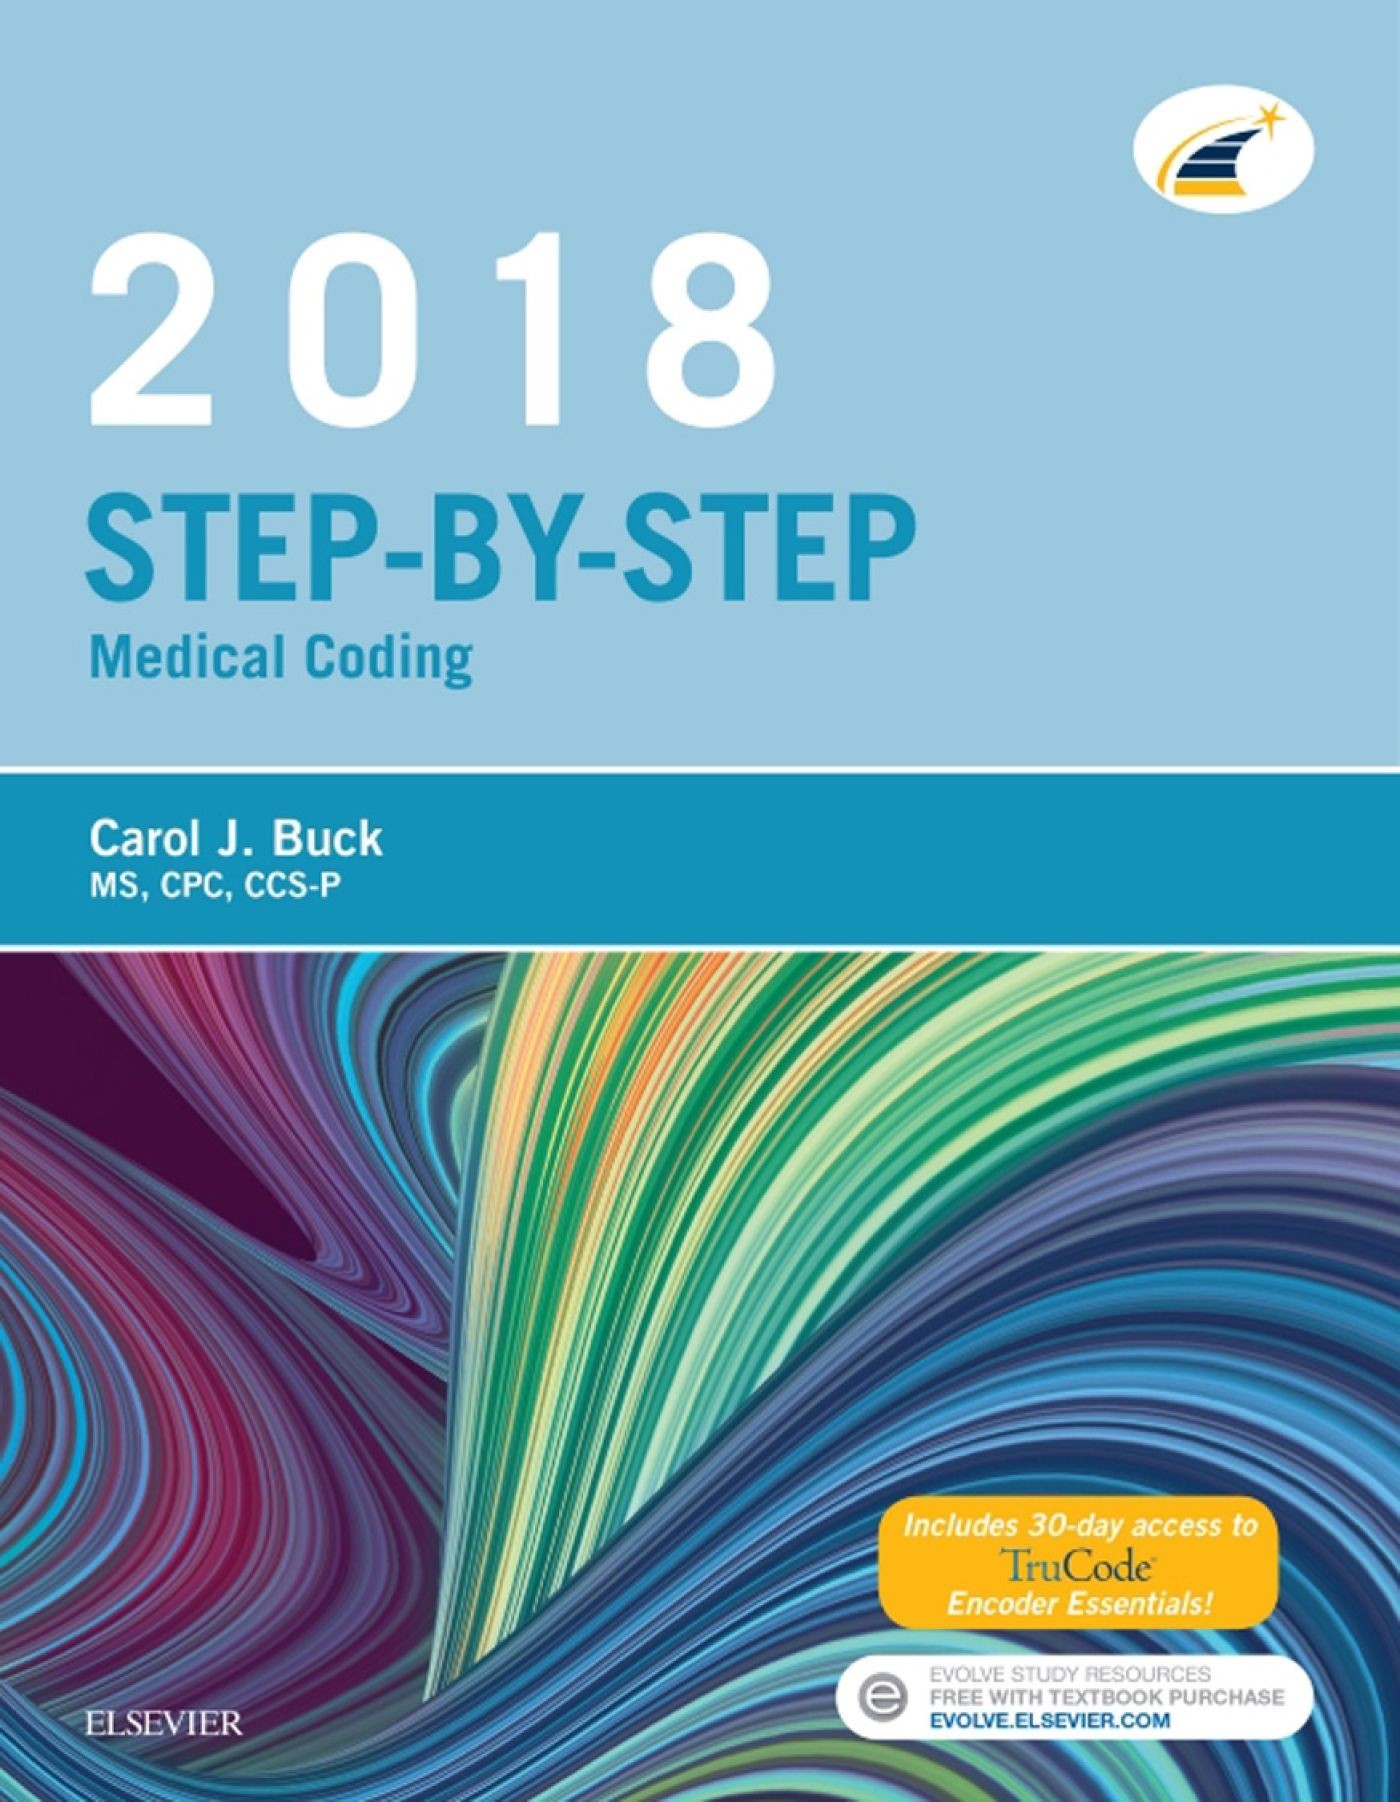 Step-by-Step Medical Coding, 2018 Edition - E-Book